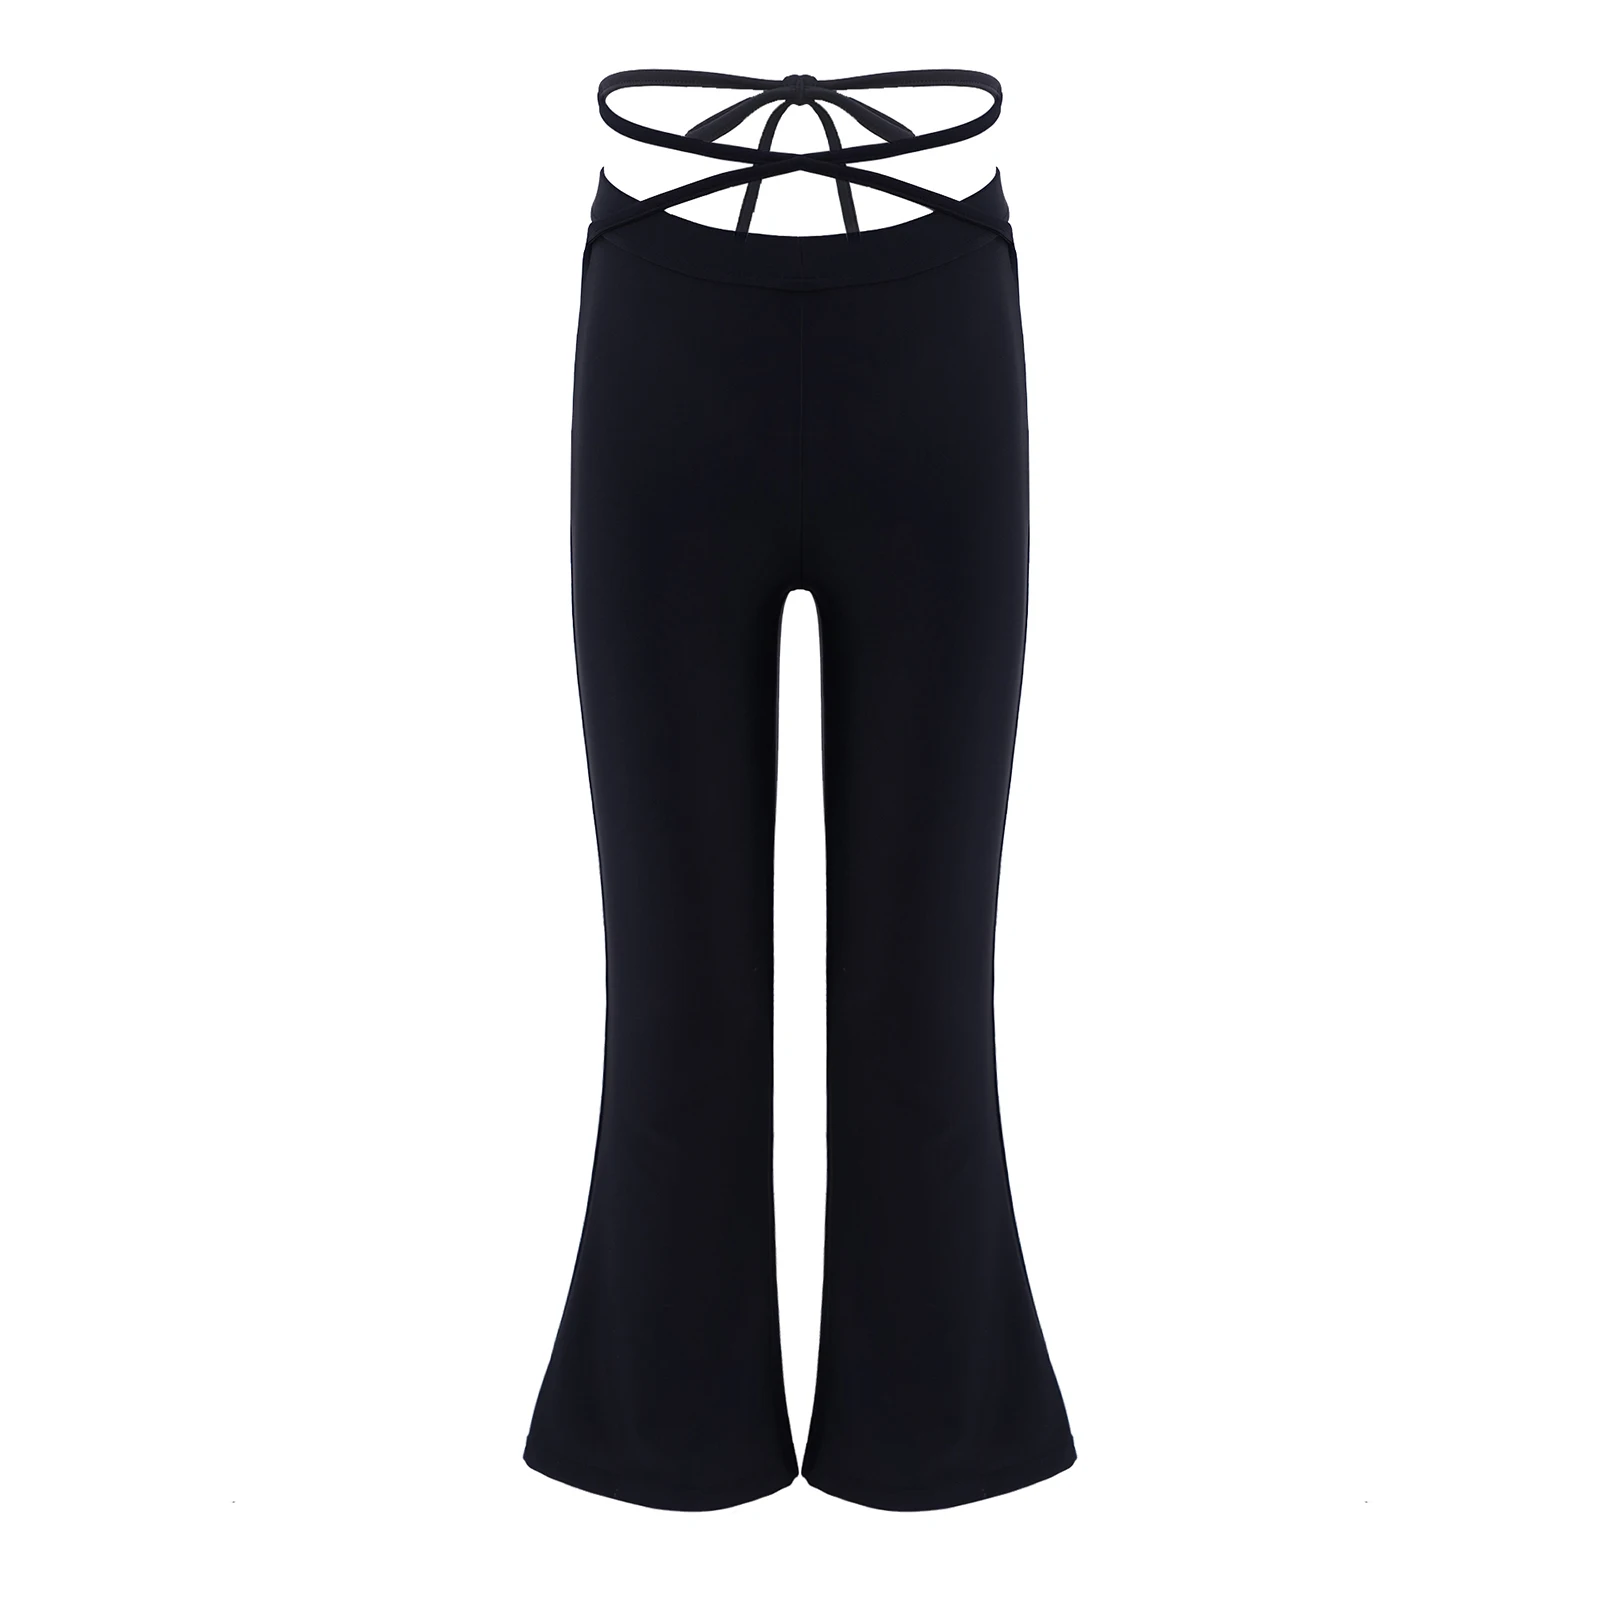 

Kids Girls Casual Flared Pants Pure Color Modern Dancing Pants Trousers Elastic Waistband Stretchy Jazz Dance Bottoms Dancewear